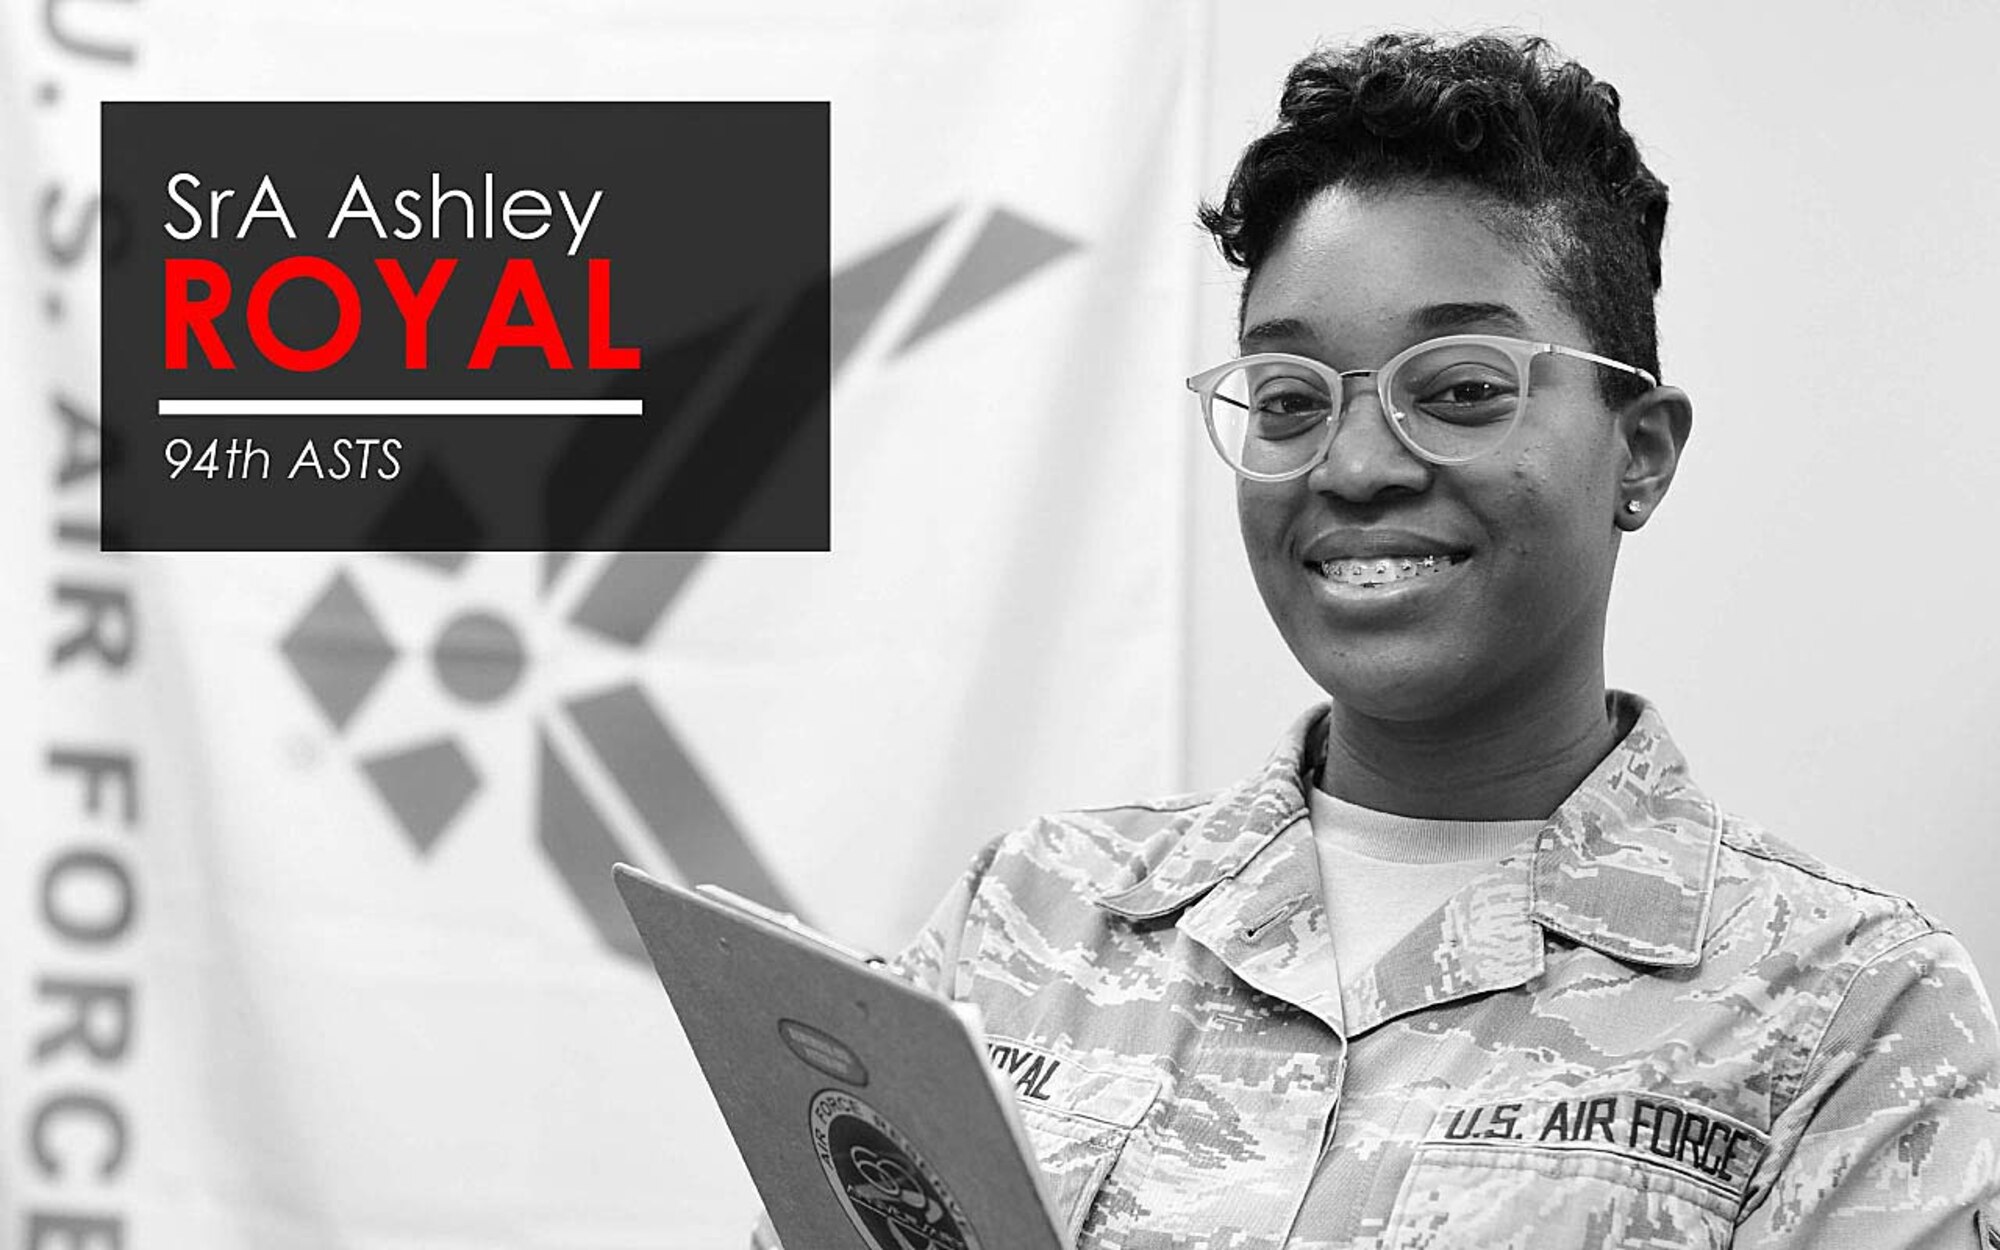 This week’s Up Close features Senior Airman Ashley Royal, assistant NCOIC of flight medicine at the 94th Aeromedical Staging Squadron. Up Close is a series spotlighting individuals around Dobbins Air Reserve Base. (U.S. Air Force graphic/Staff Sgt. Andrew Park)